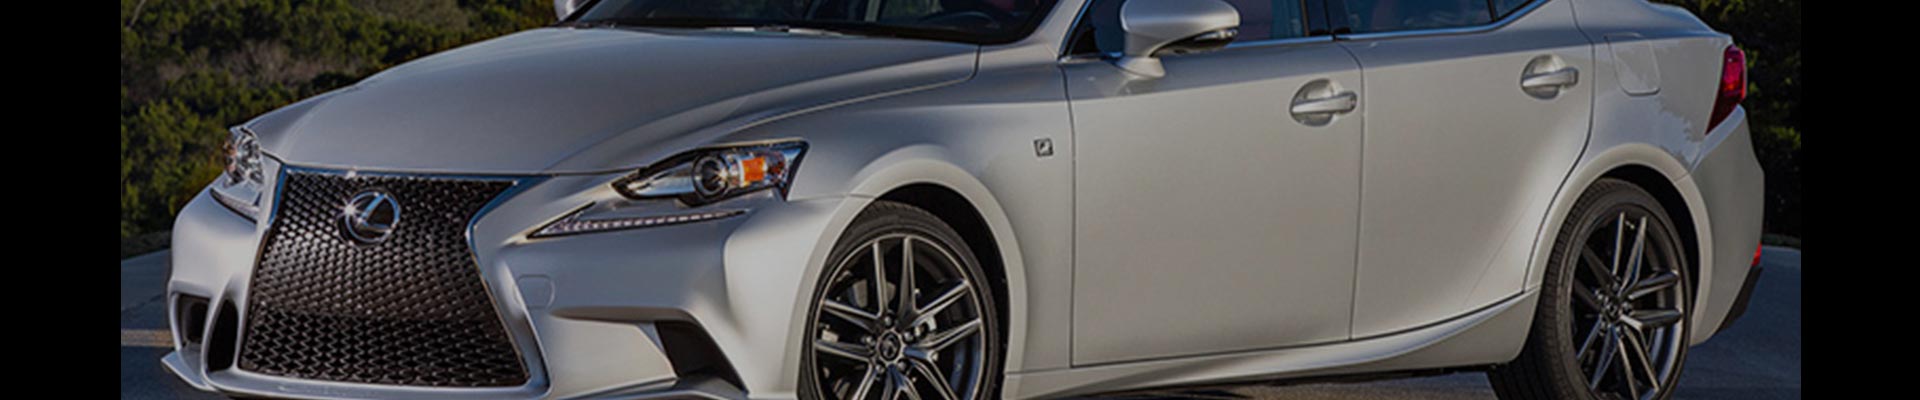 Shop Replacement and OEM 2018 Lexus IS350 Parts with Discounted Price on the Net